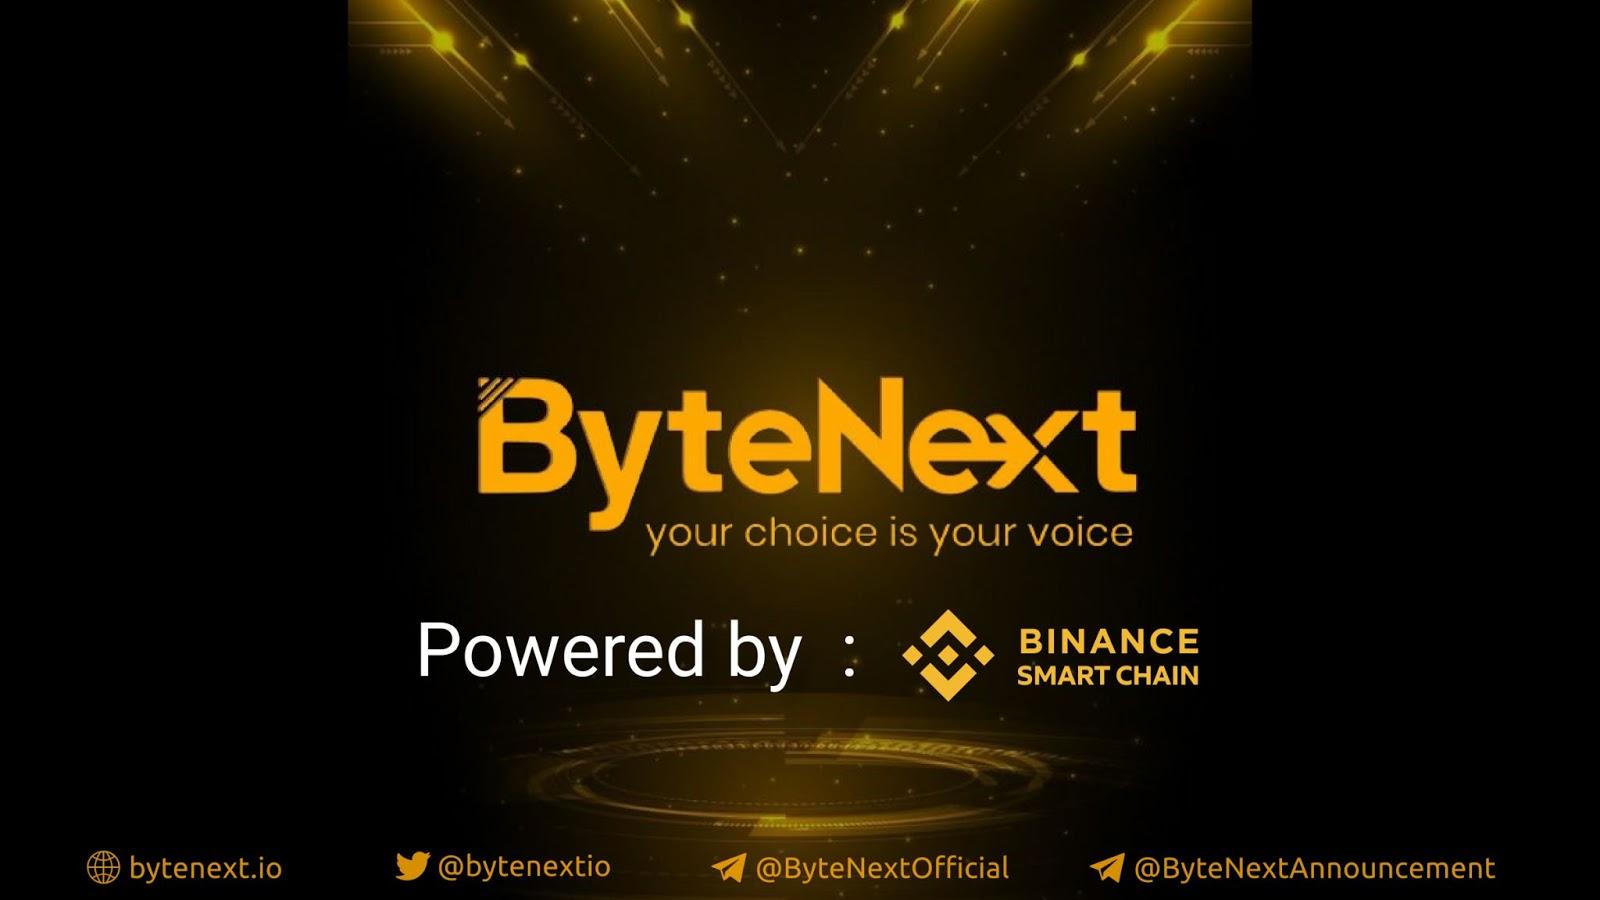 Blockchain solution provider ByteNext launches AvatarArt, an NFT Marketplace for the creator community